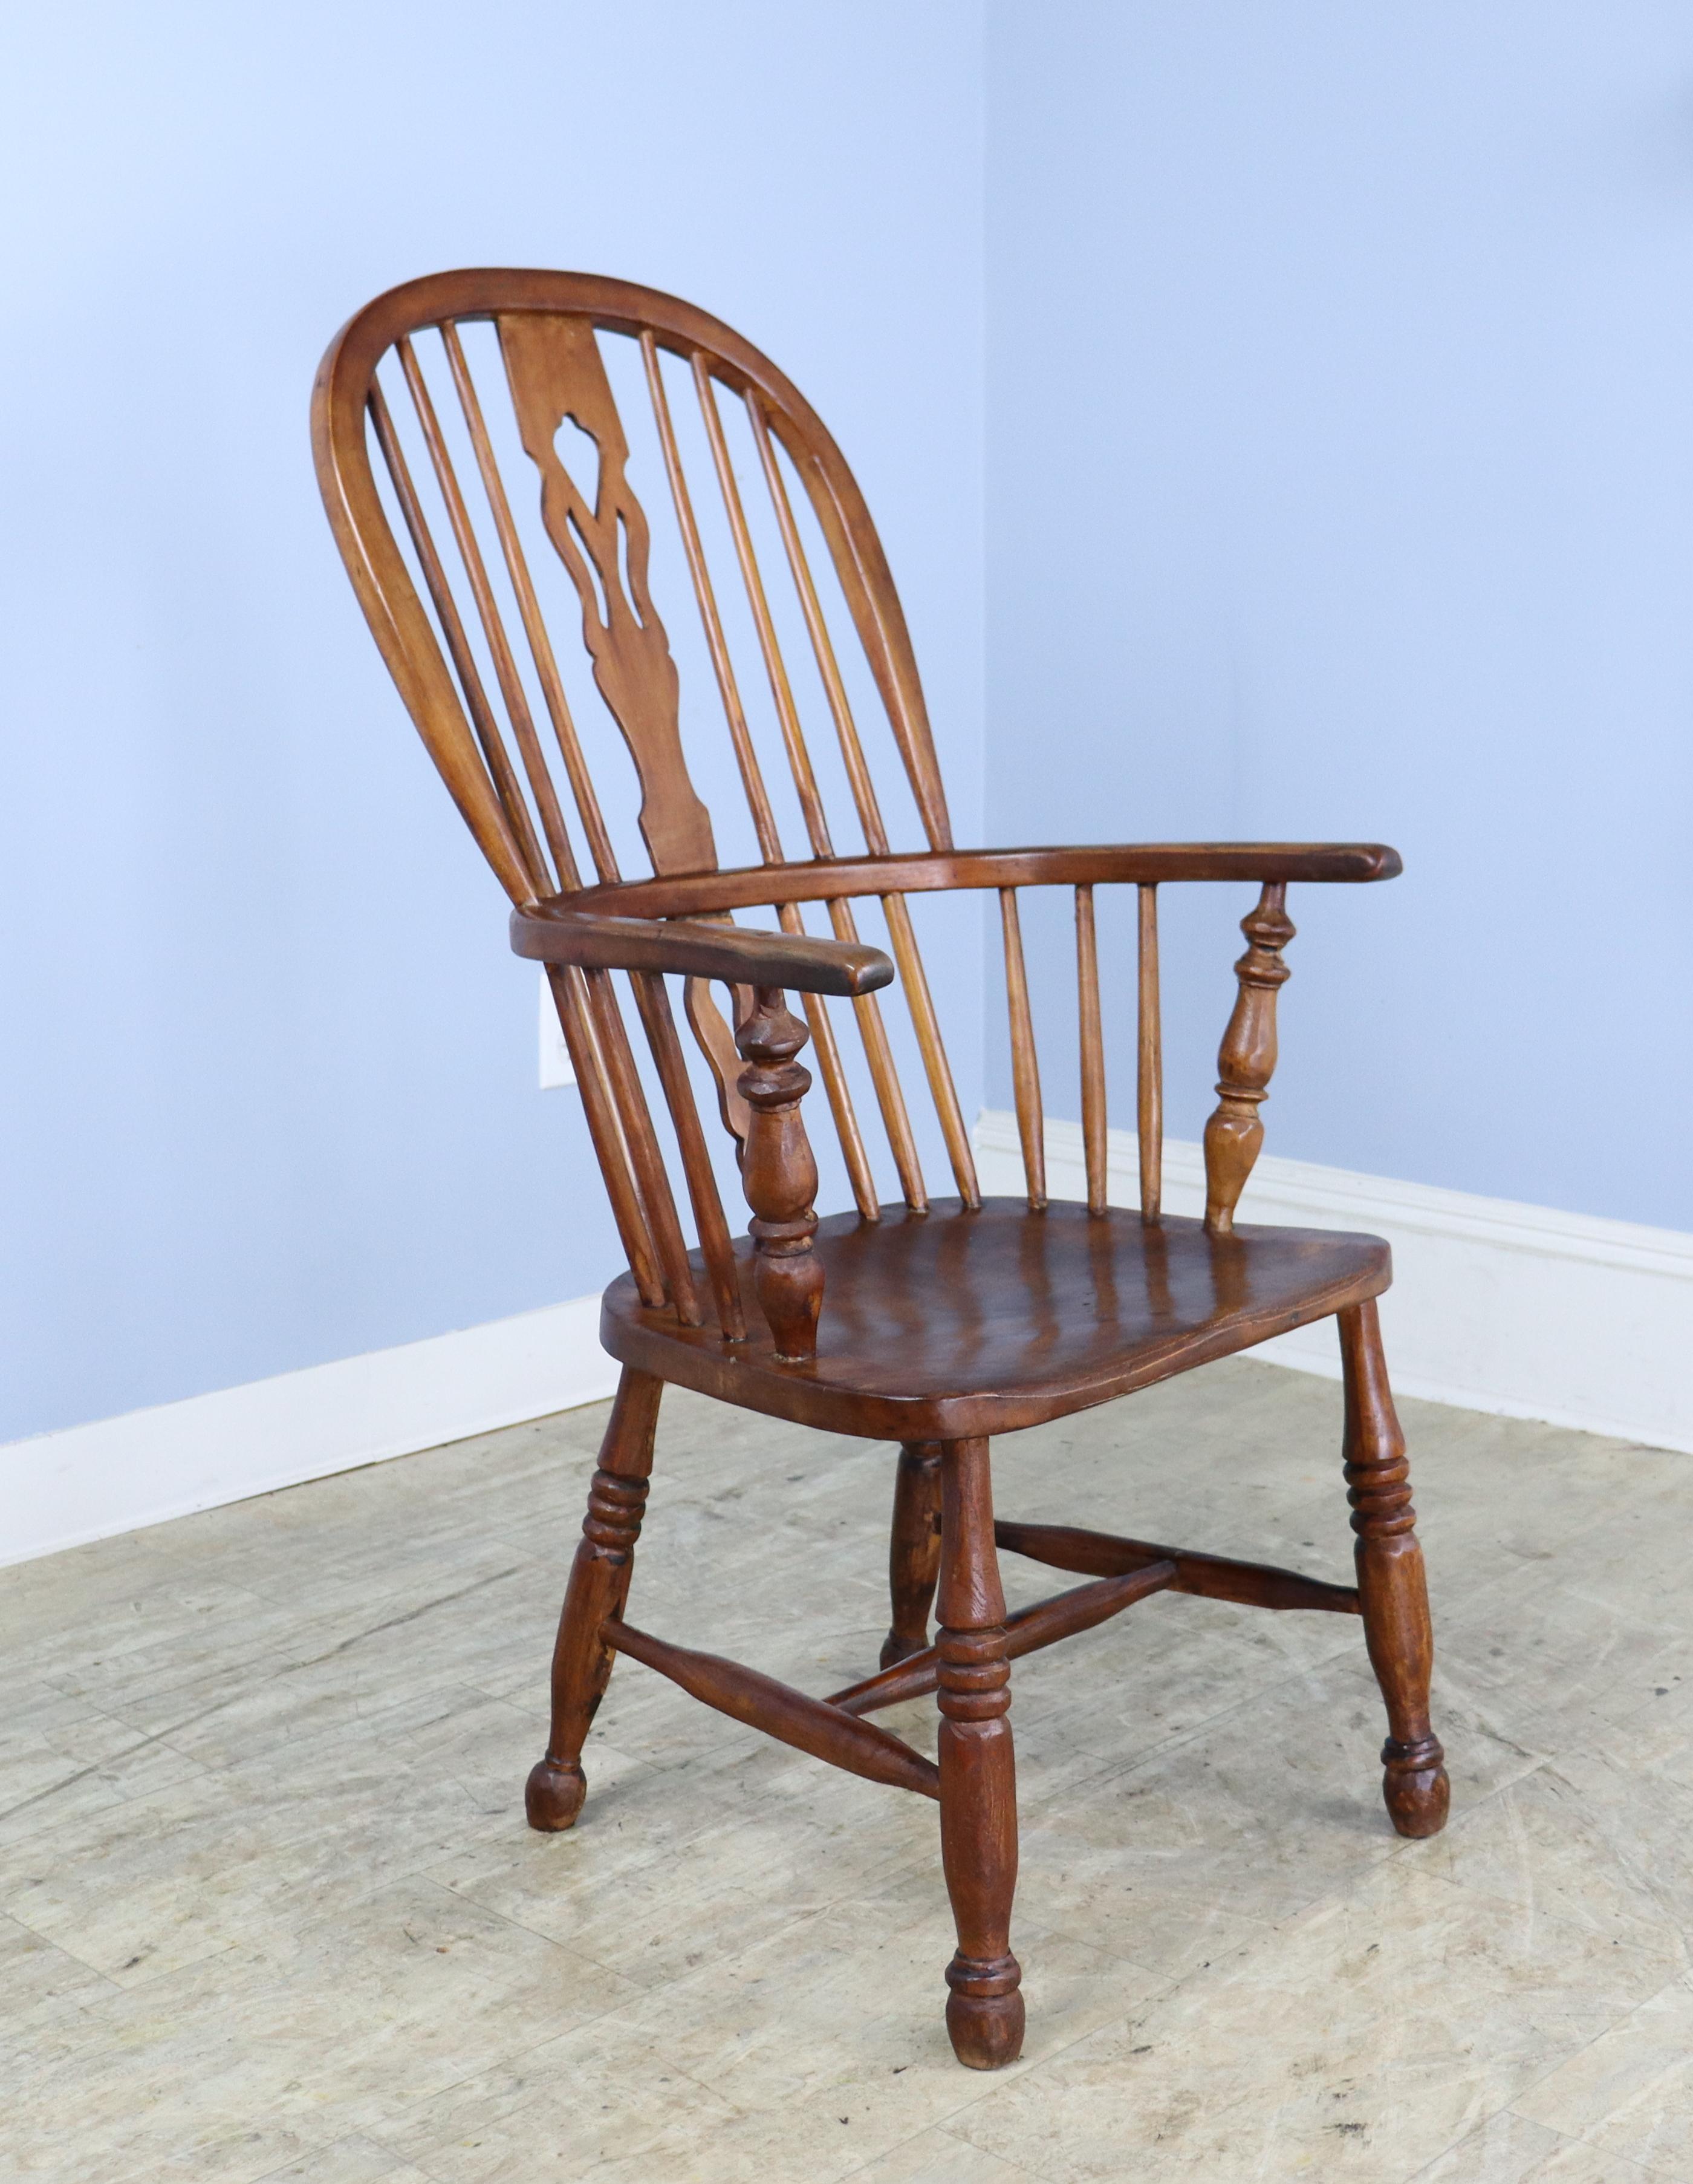 A classic fruitwood Windsor chair, hand-carved and refined. The fiddleback splat echoes the curves of a violin, typical of the Queen Anne style, although this piece is mid 19th Century, so later.  Great color and patina, reflecting its use. Turned